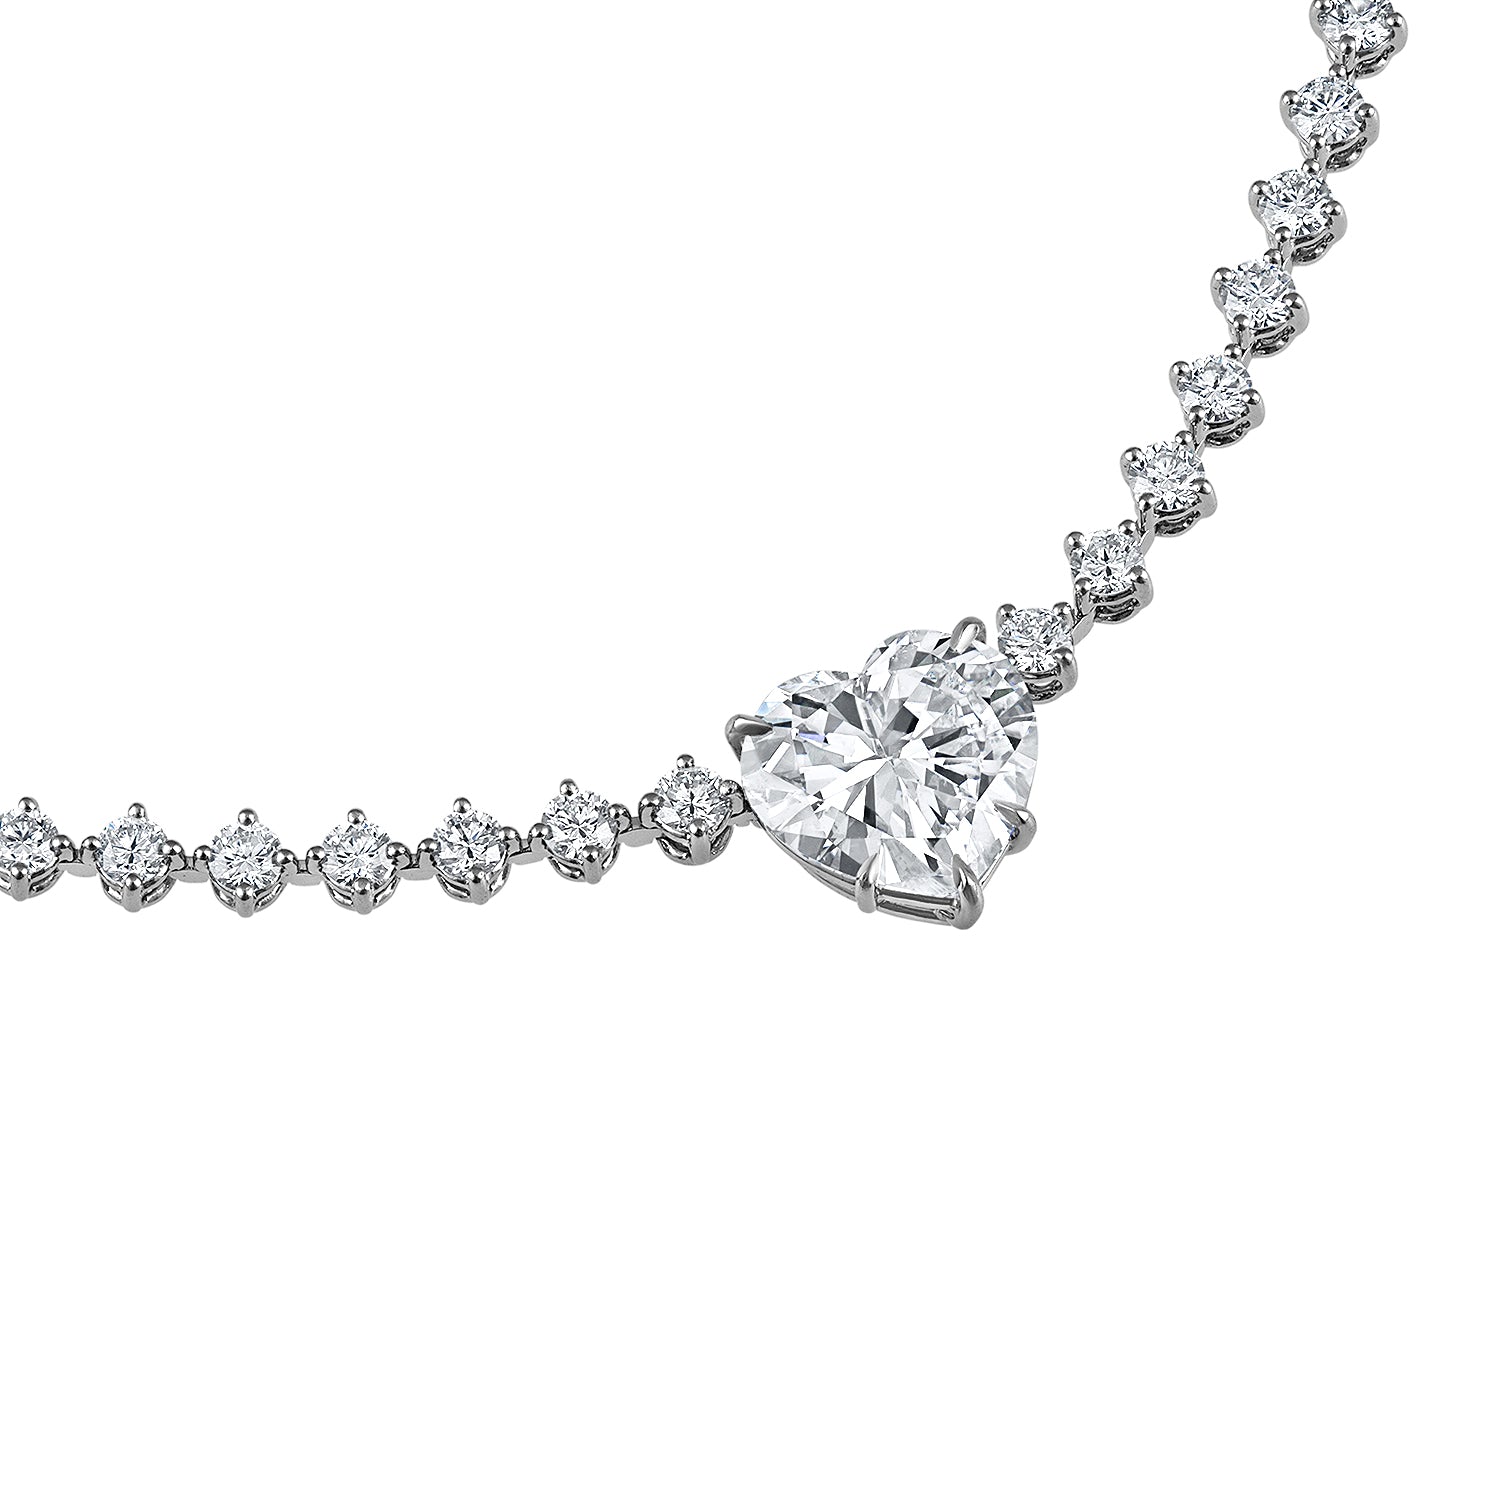 Side view of the platinum heart-shaped diamond necklace, showcasing the exquisite compass prong setting and the continuous riviera style diamond chain.